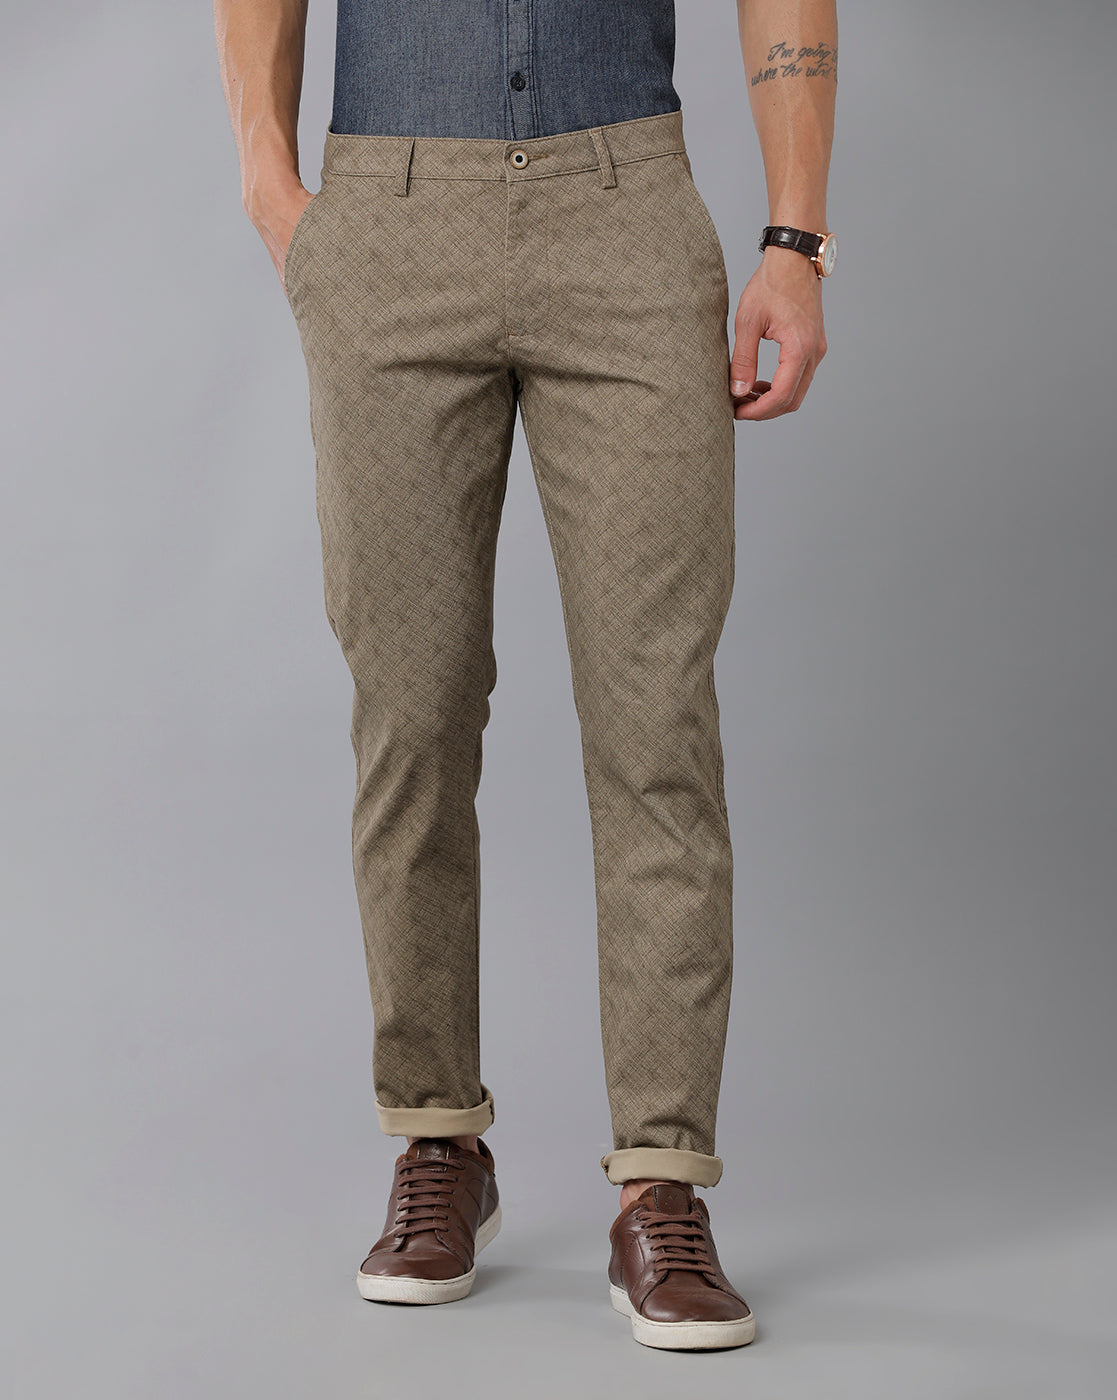 Polo Fit Pants For Men  Archana Emart